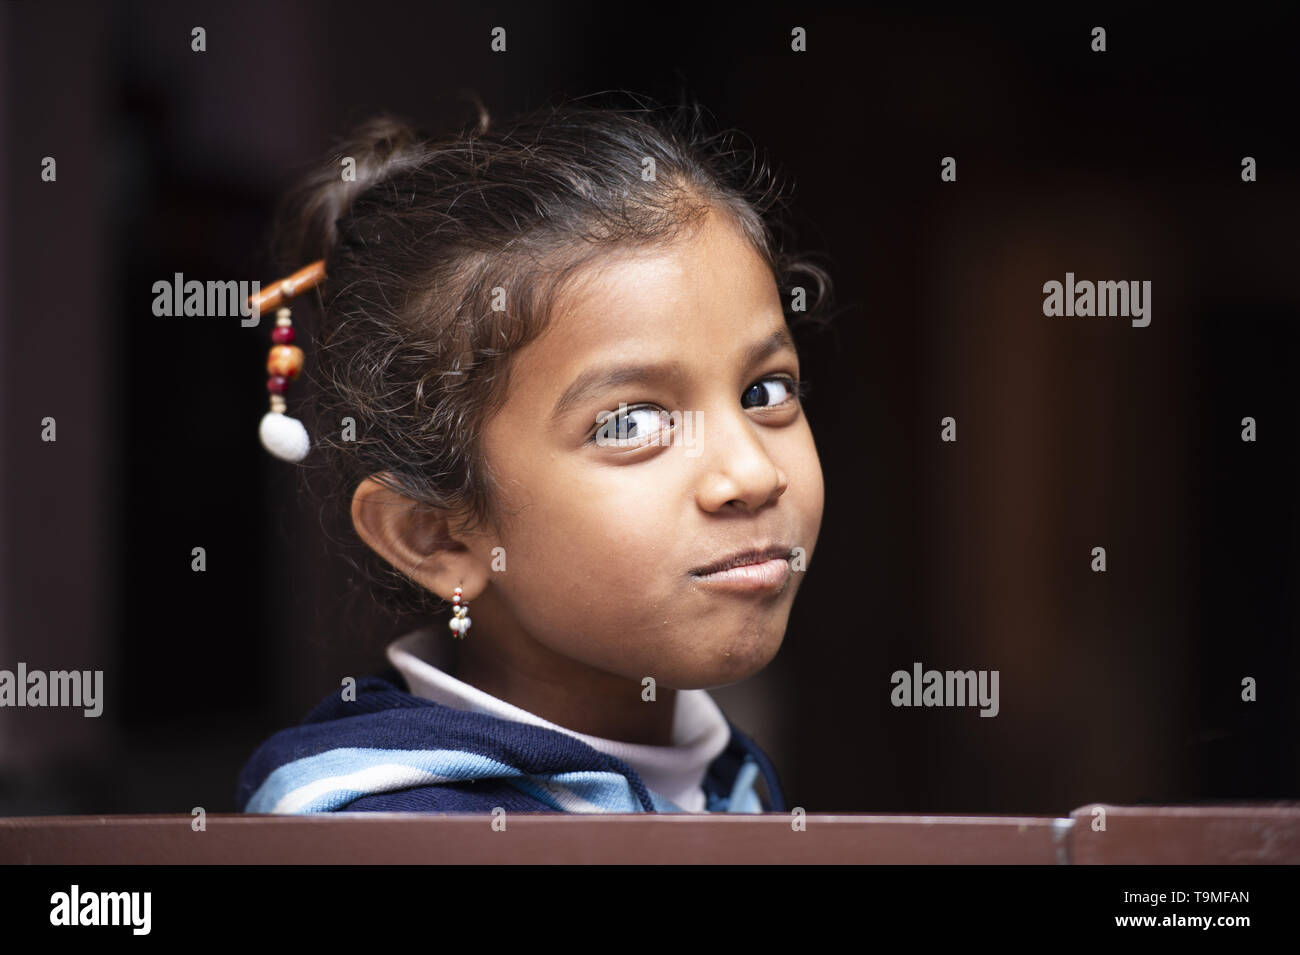 Portrait of a smiling little beautiful child in Varanasi. Varanasi is also known as Benares. Stock Photo